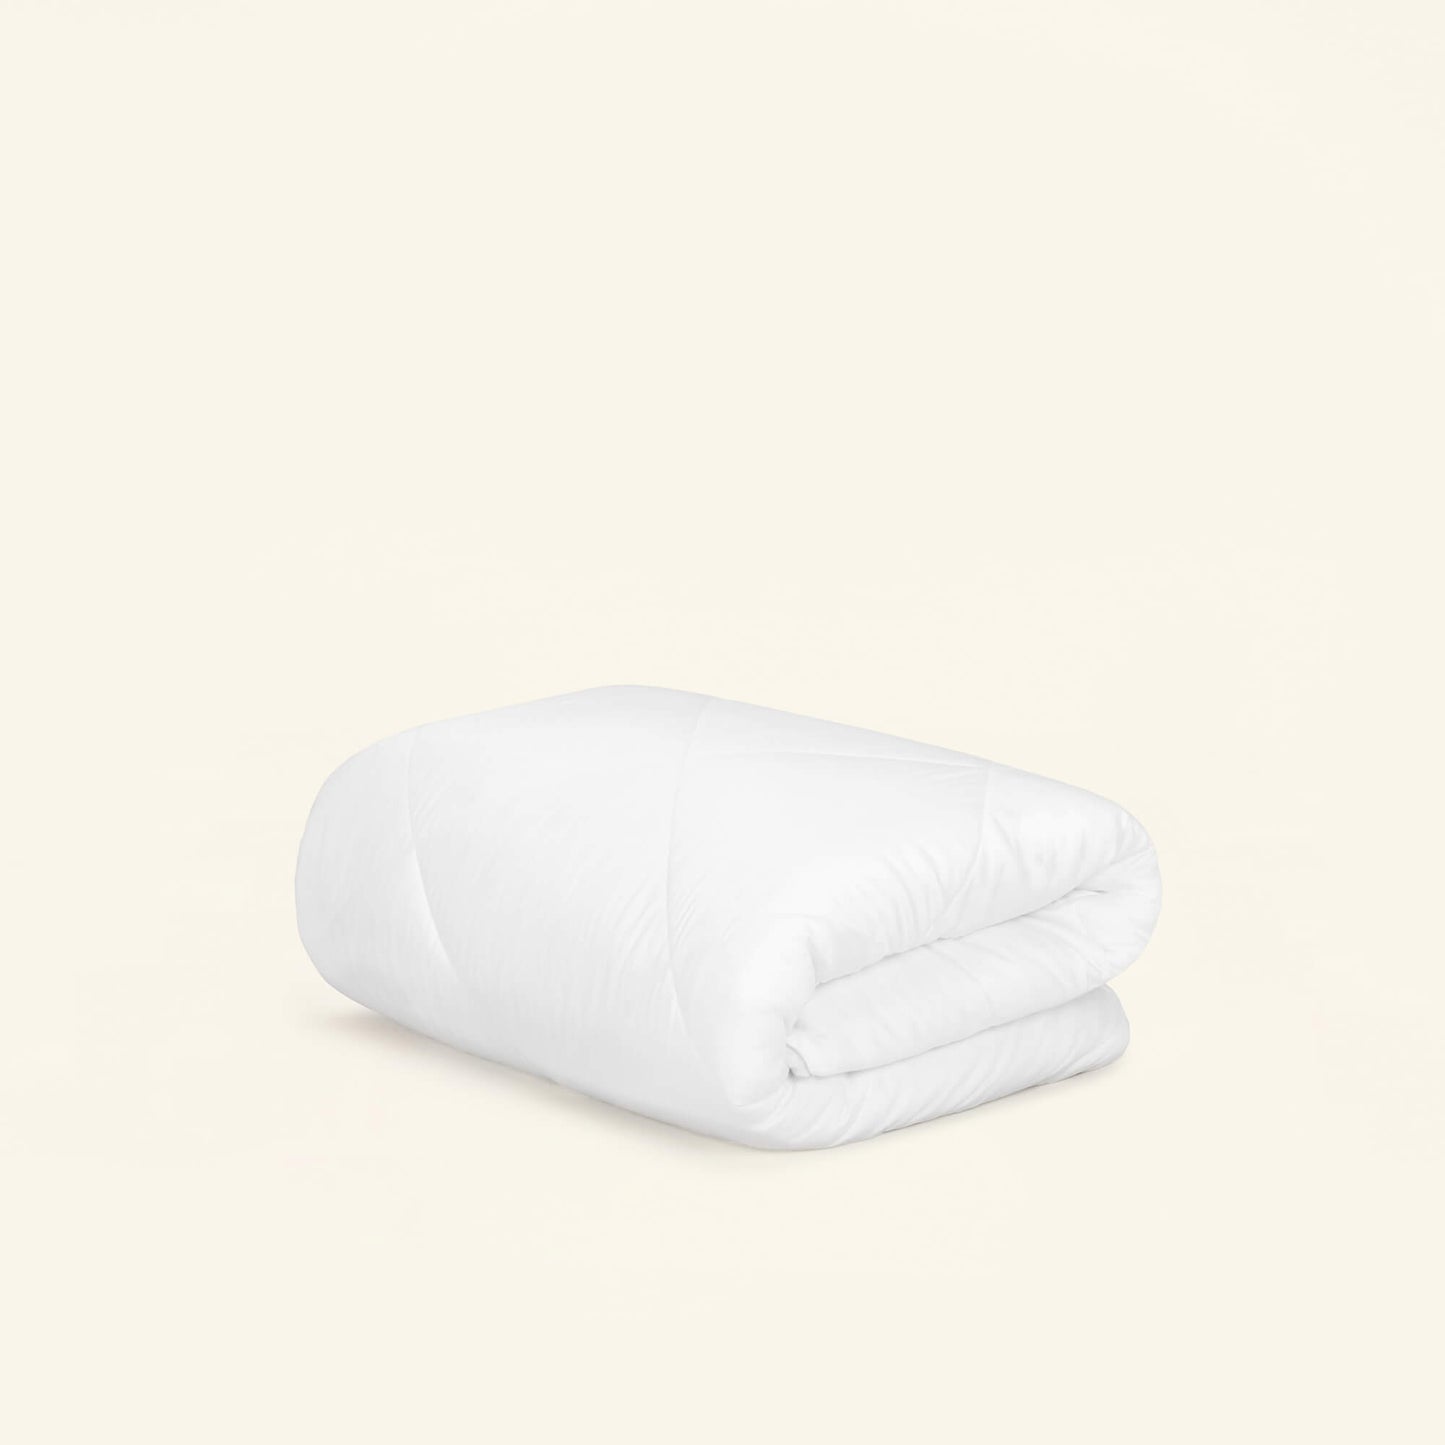 The Slumber Cloud UltraCool Comforter takes the ClimaDry™ by Outlast and pairs it with an 89% cooling nylon and 11% spandex outer cover that mimics silk creating the silky smooth and soft to the touch hand feel.